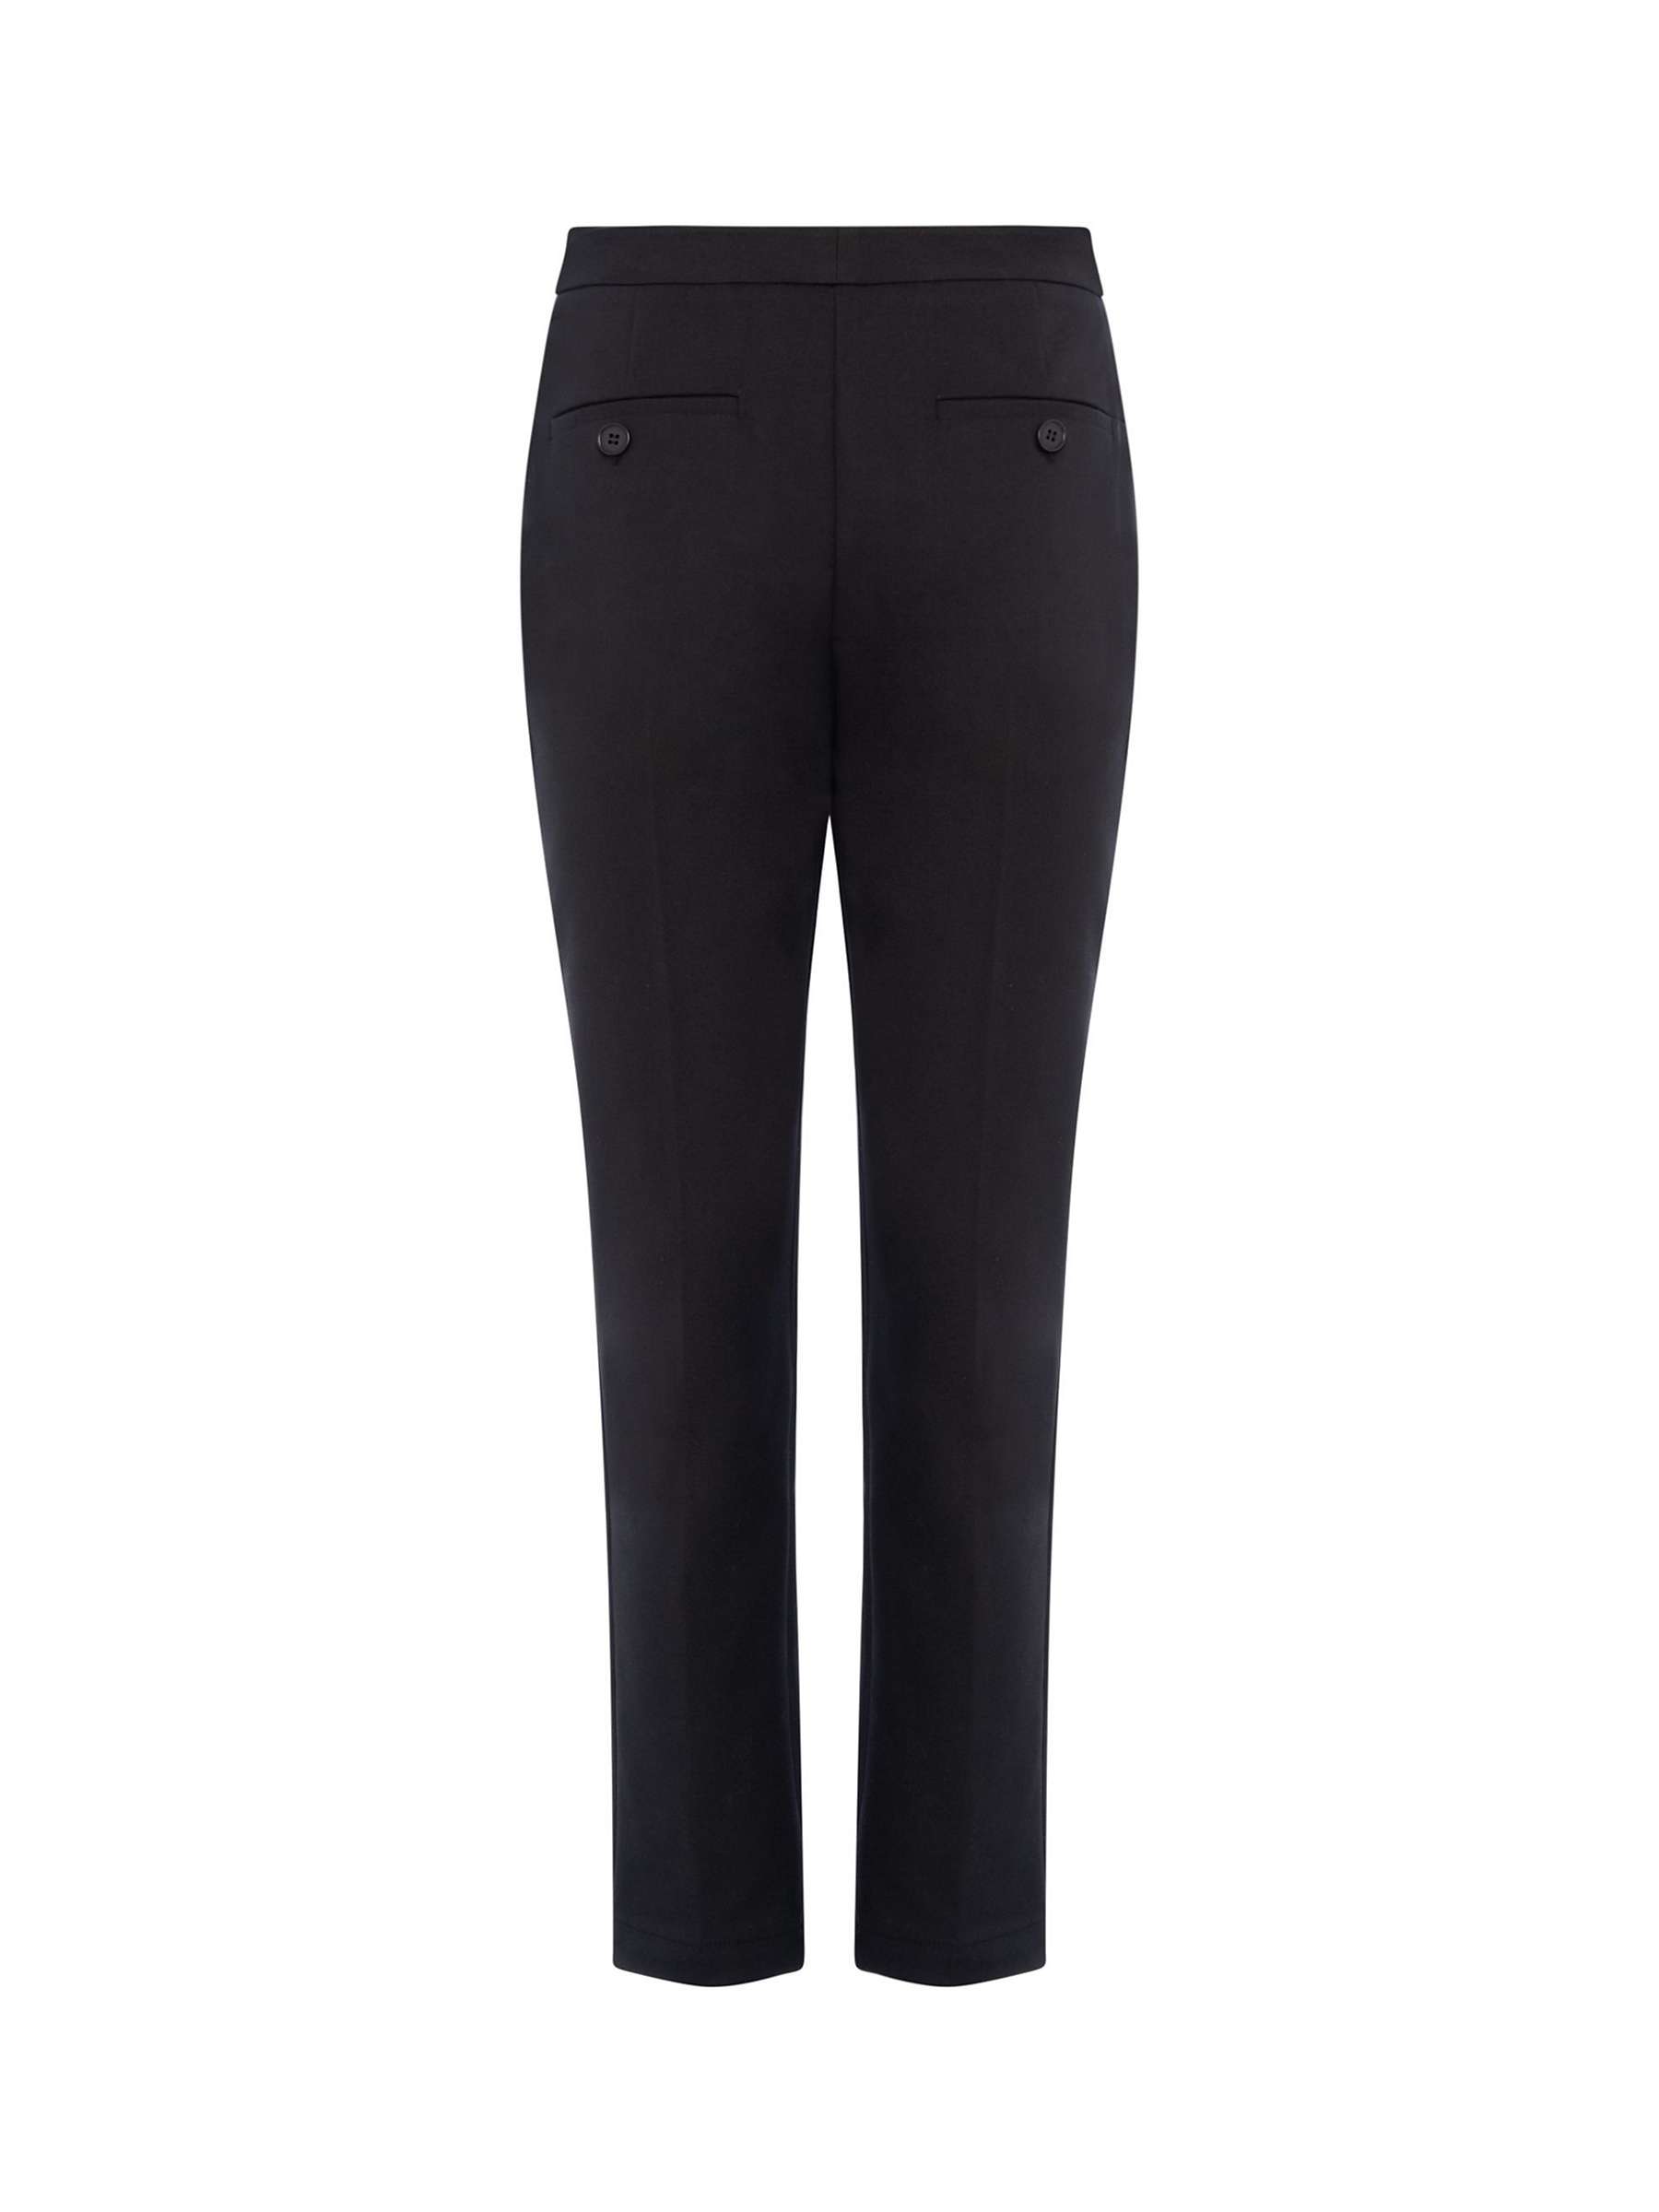 Buy French Connection Fino Glass Stretch Slim Trousers, Black Online at johnlewis.com